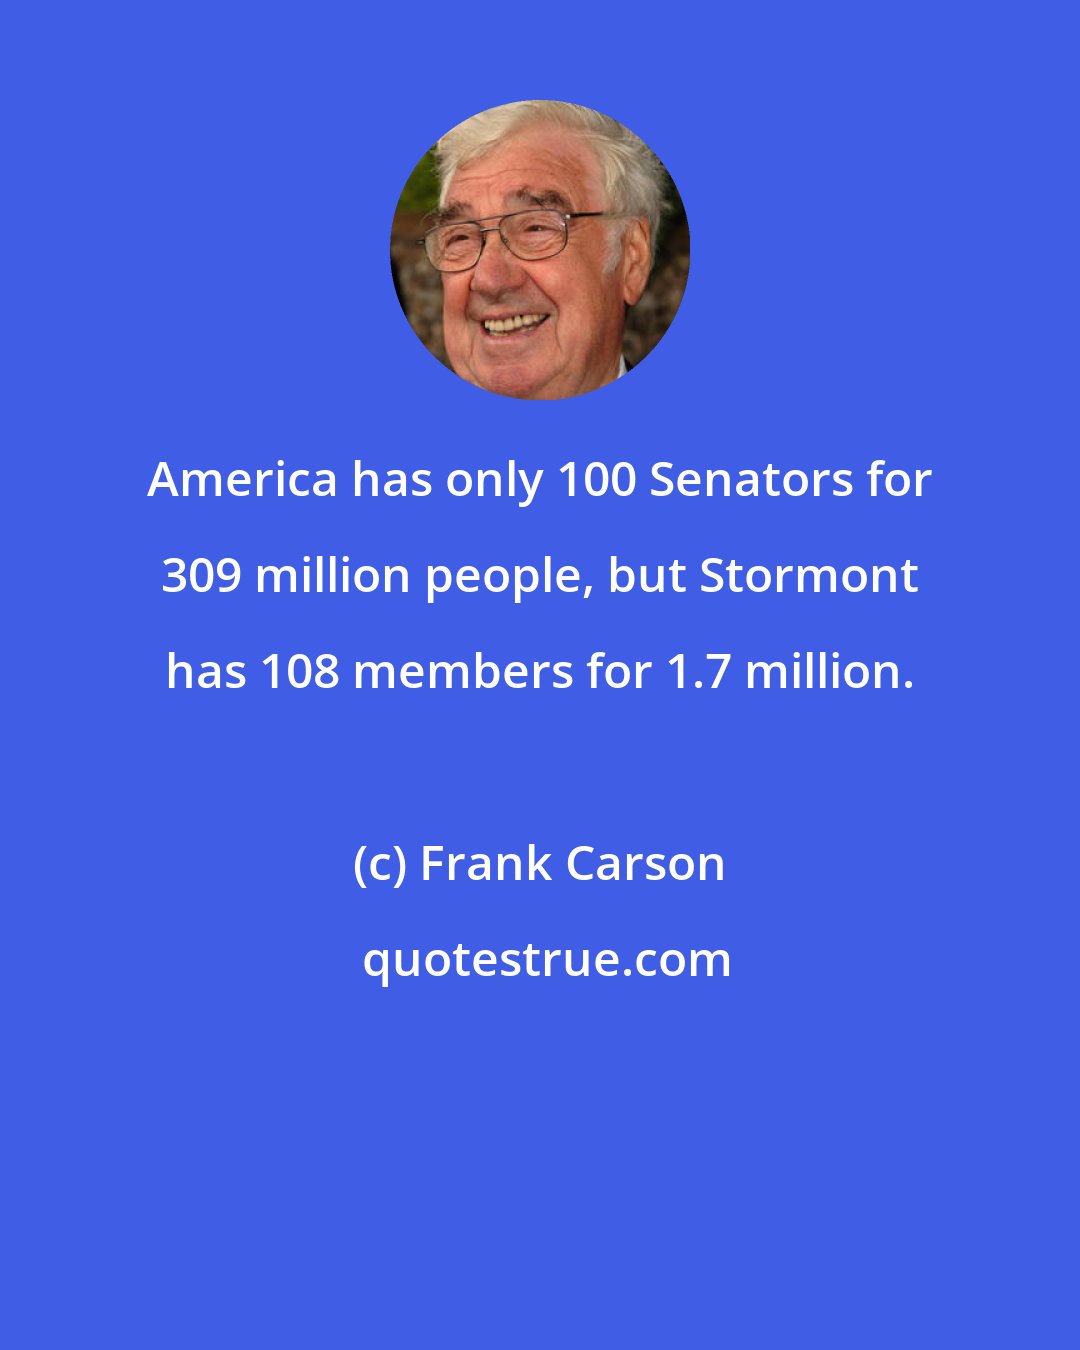 Frank Carson: America has only 100 Senators for 309 million people, but Stormont has 108 members for 1.7 million.